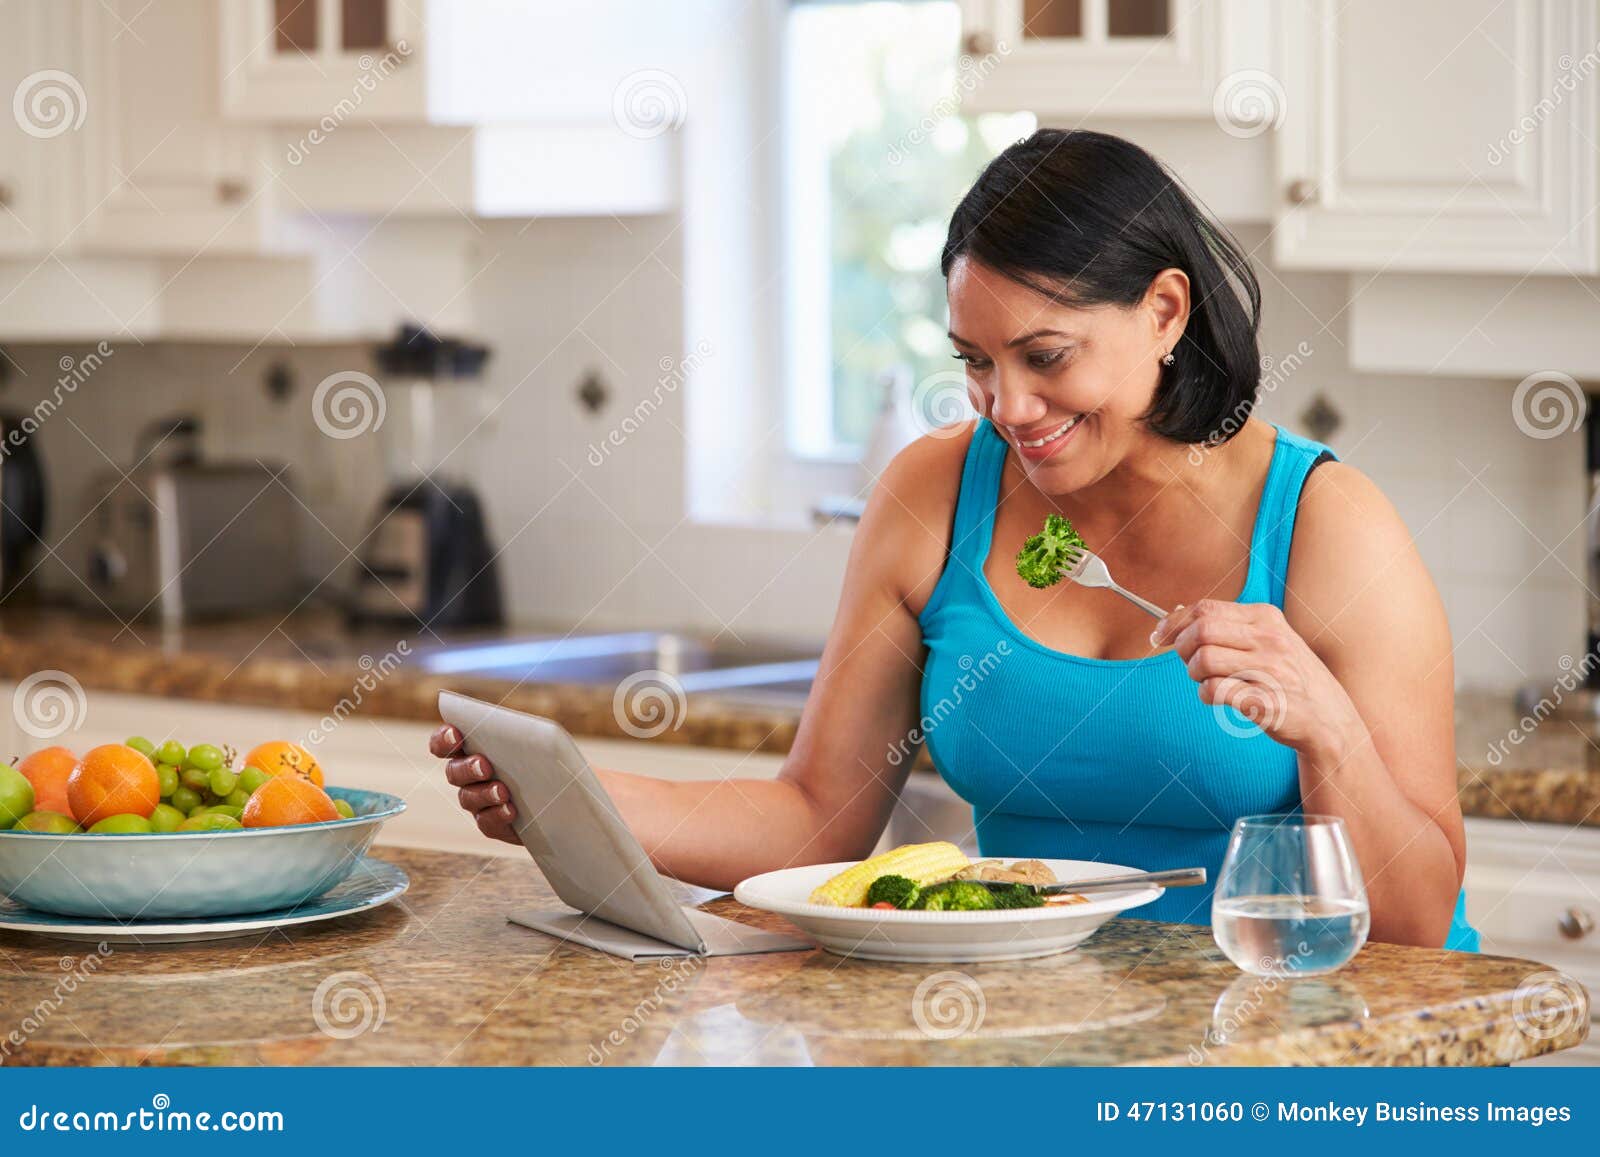 overweight woman with digital tablet checking calorie intake